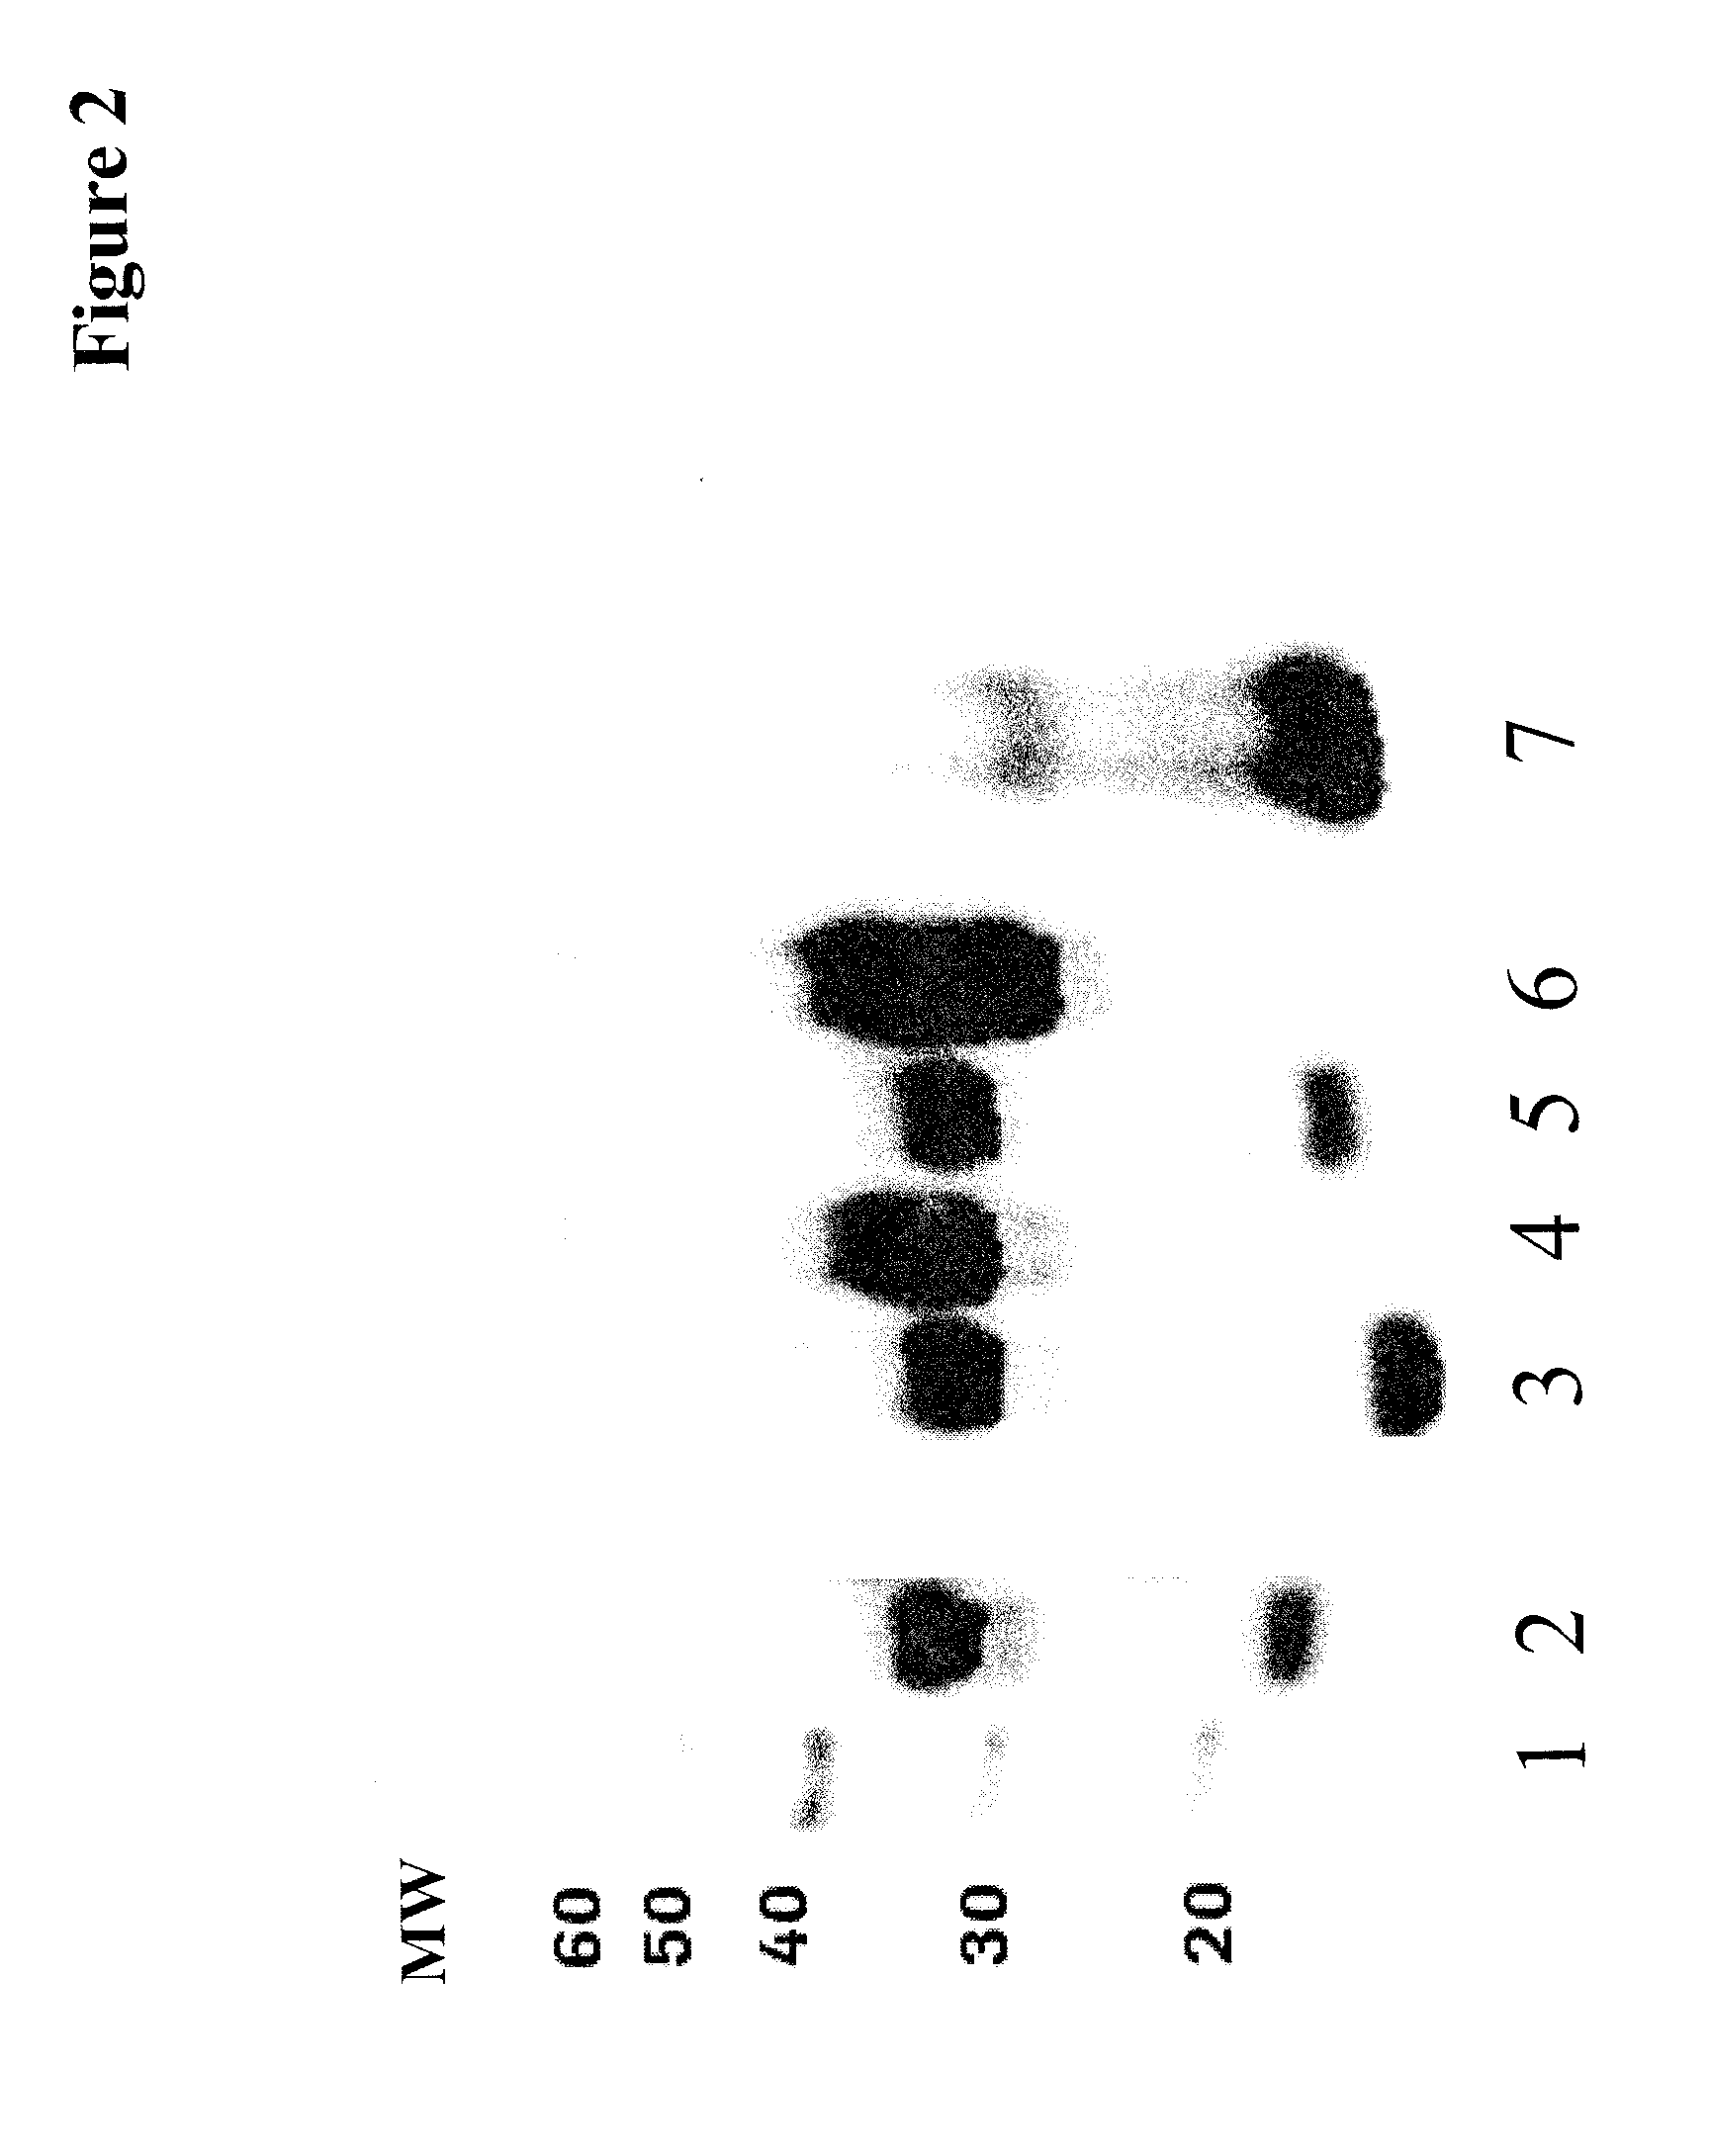 Improved recombinant polypeptide production methods